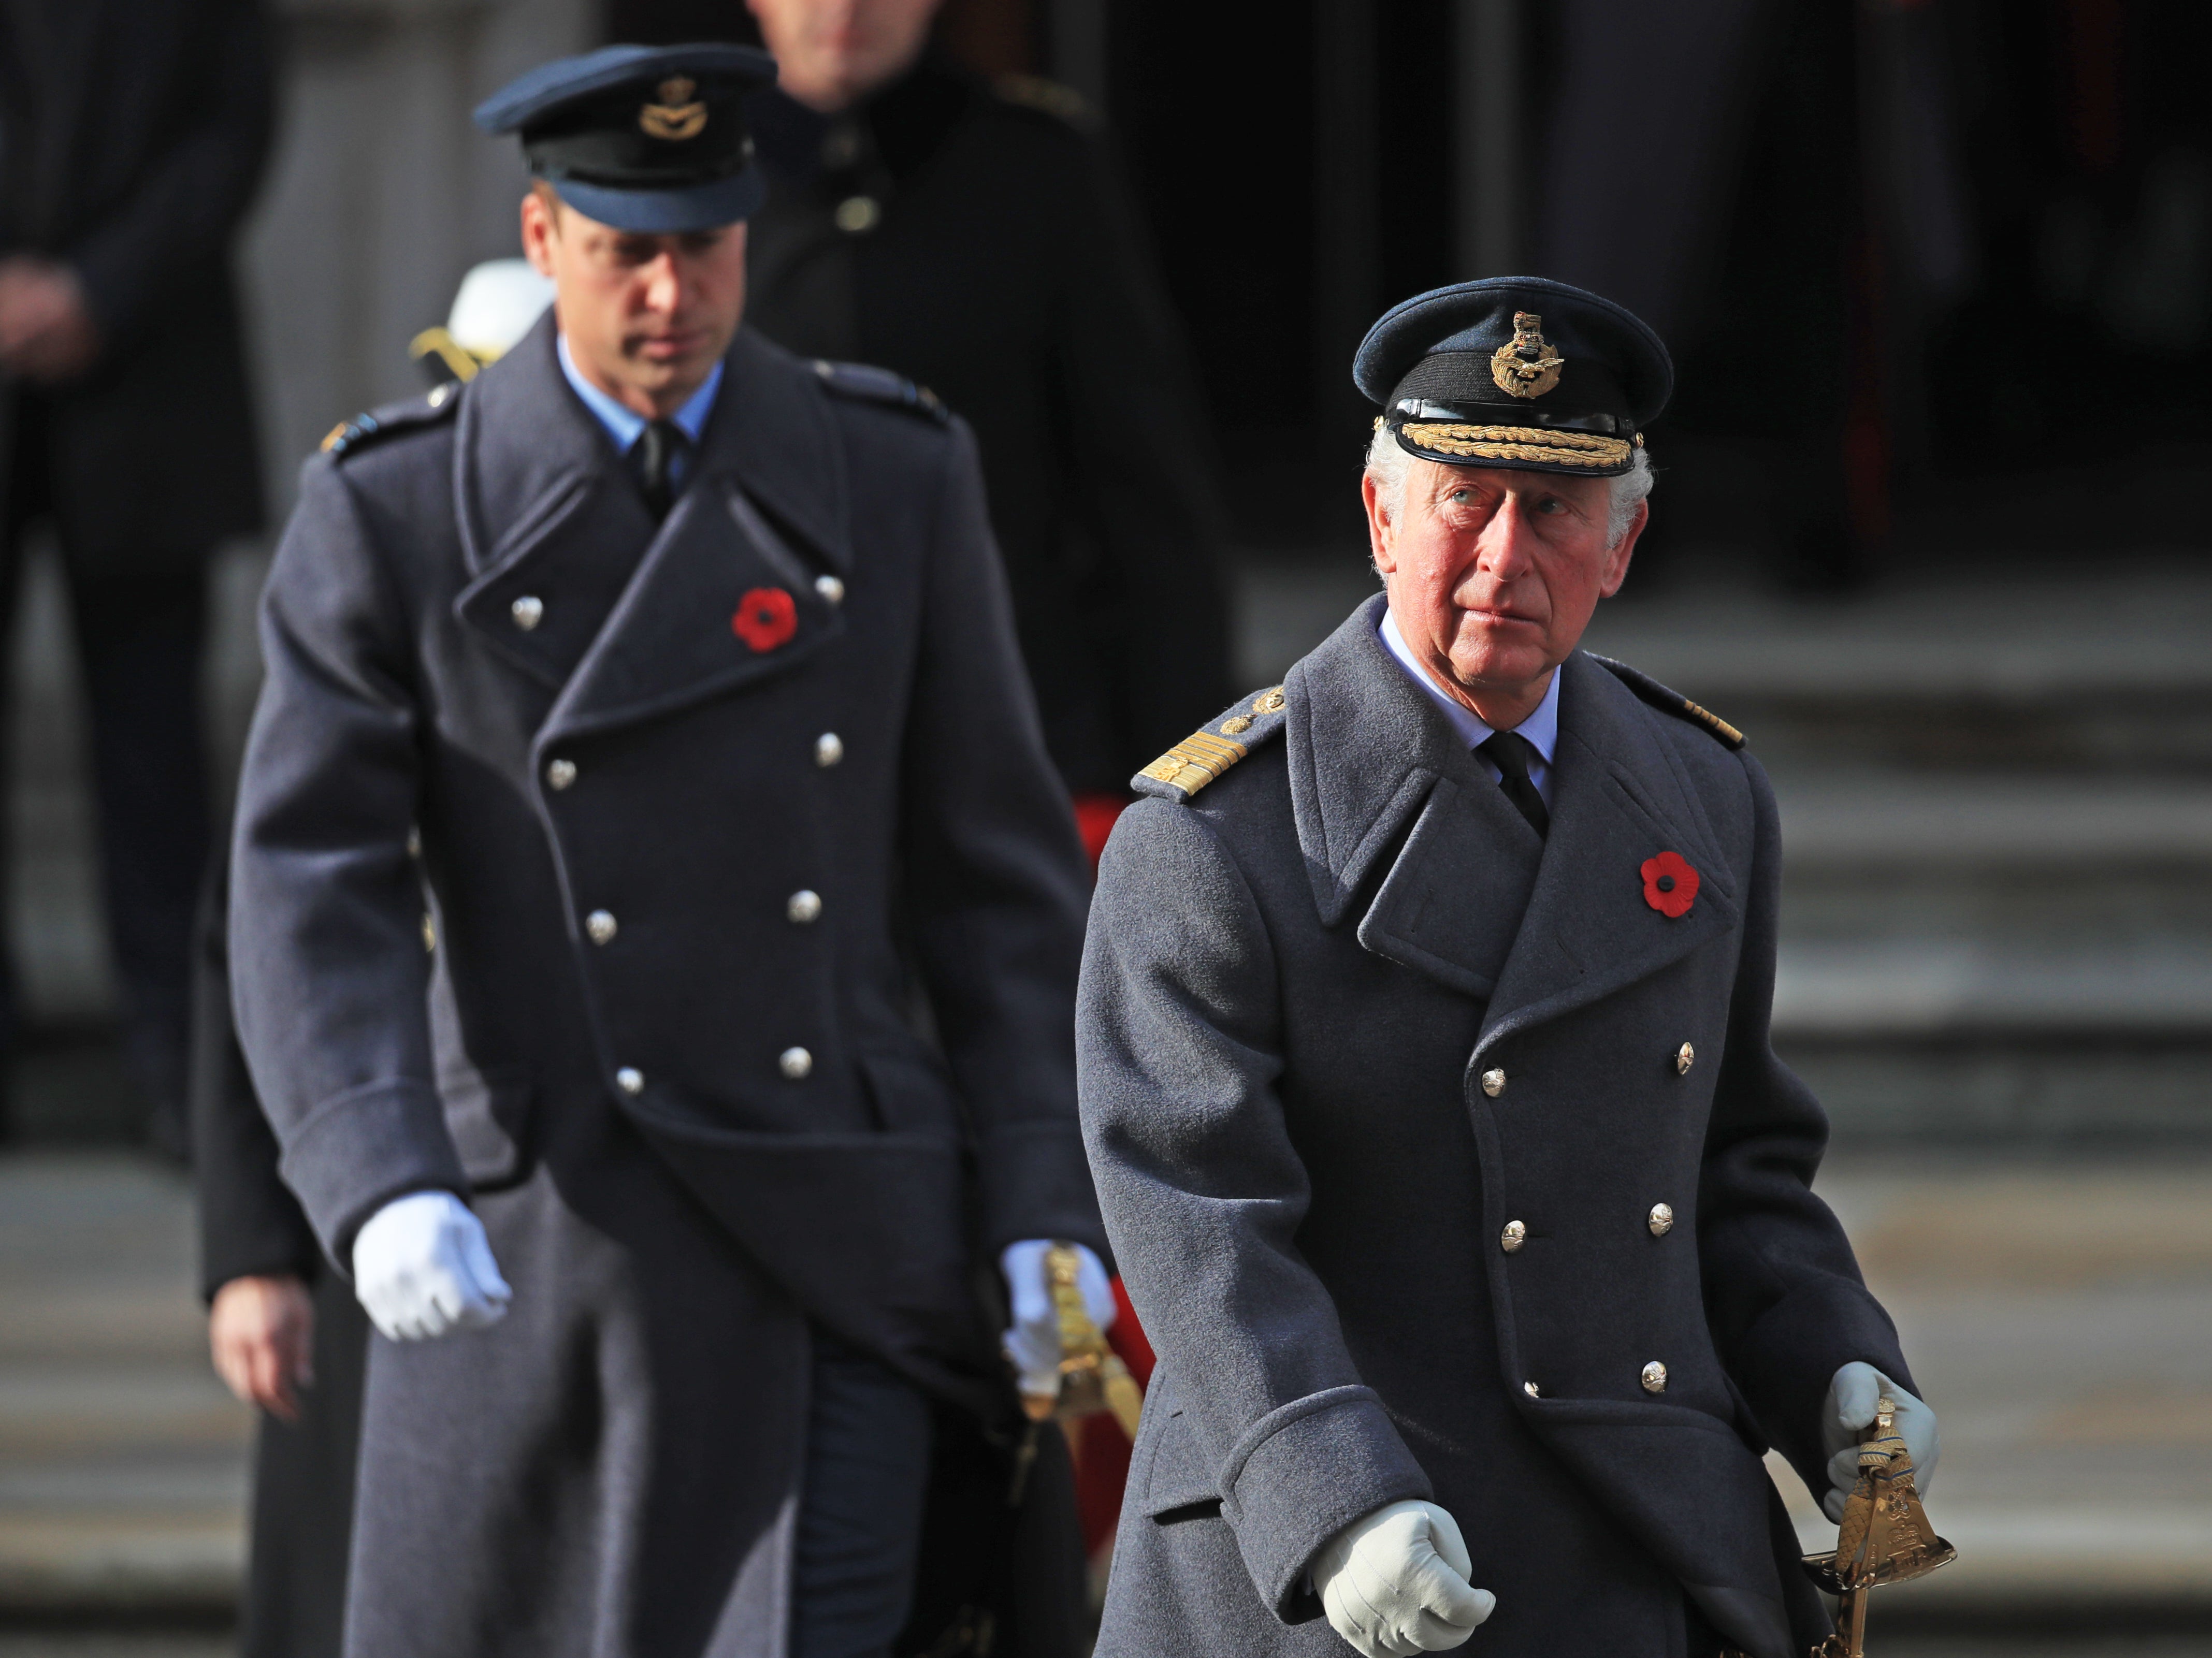 Charles and Williams are said to have different views on the future of the royal family